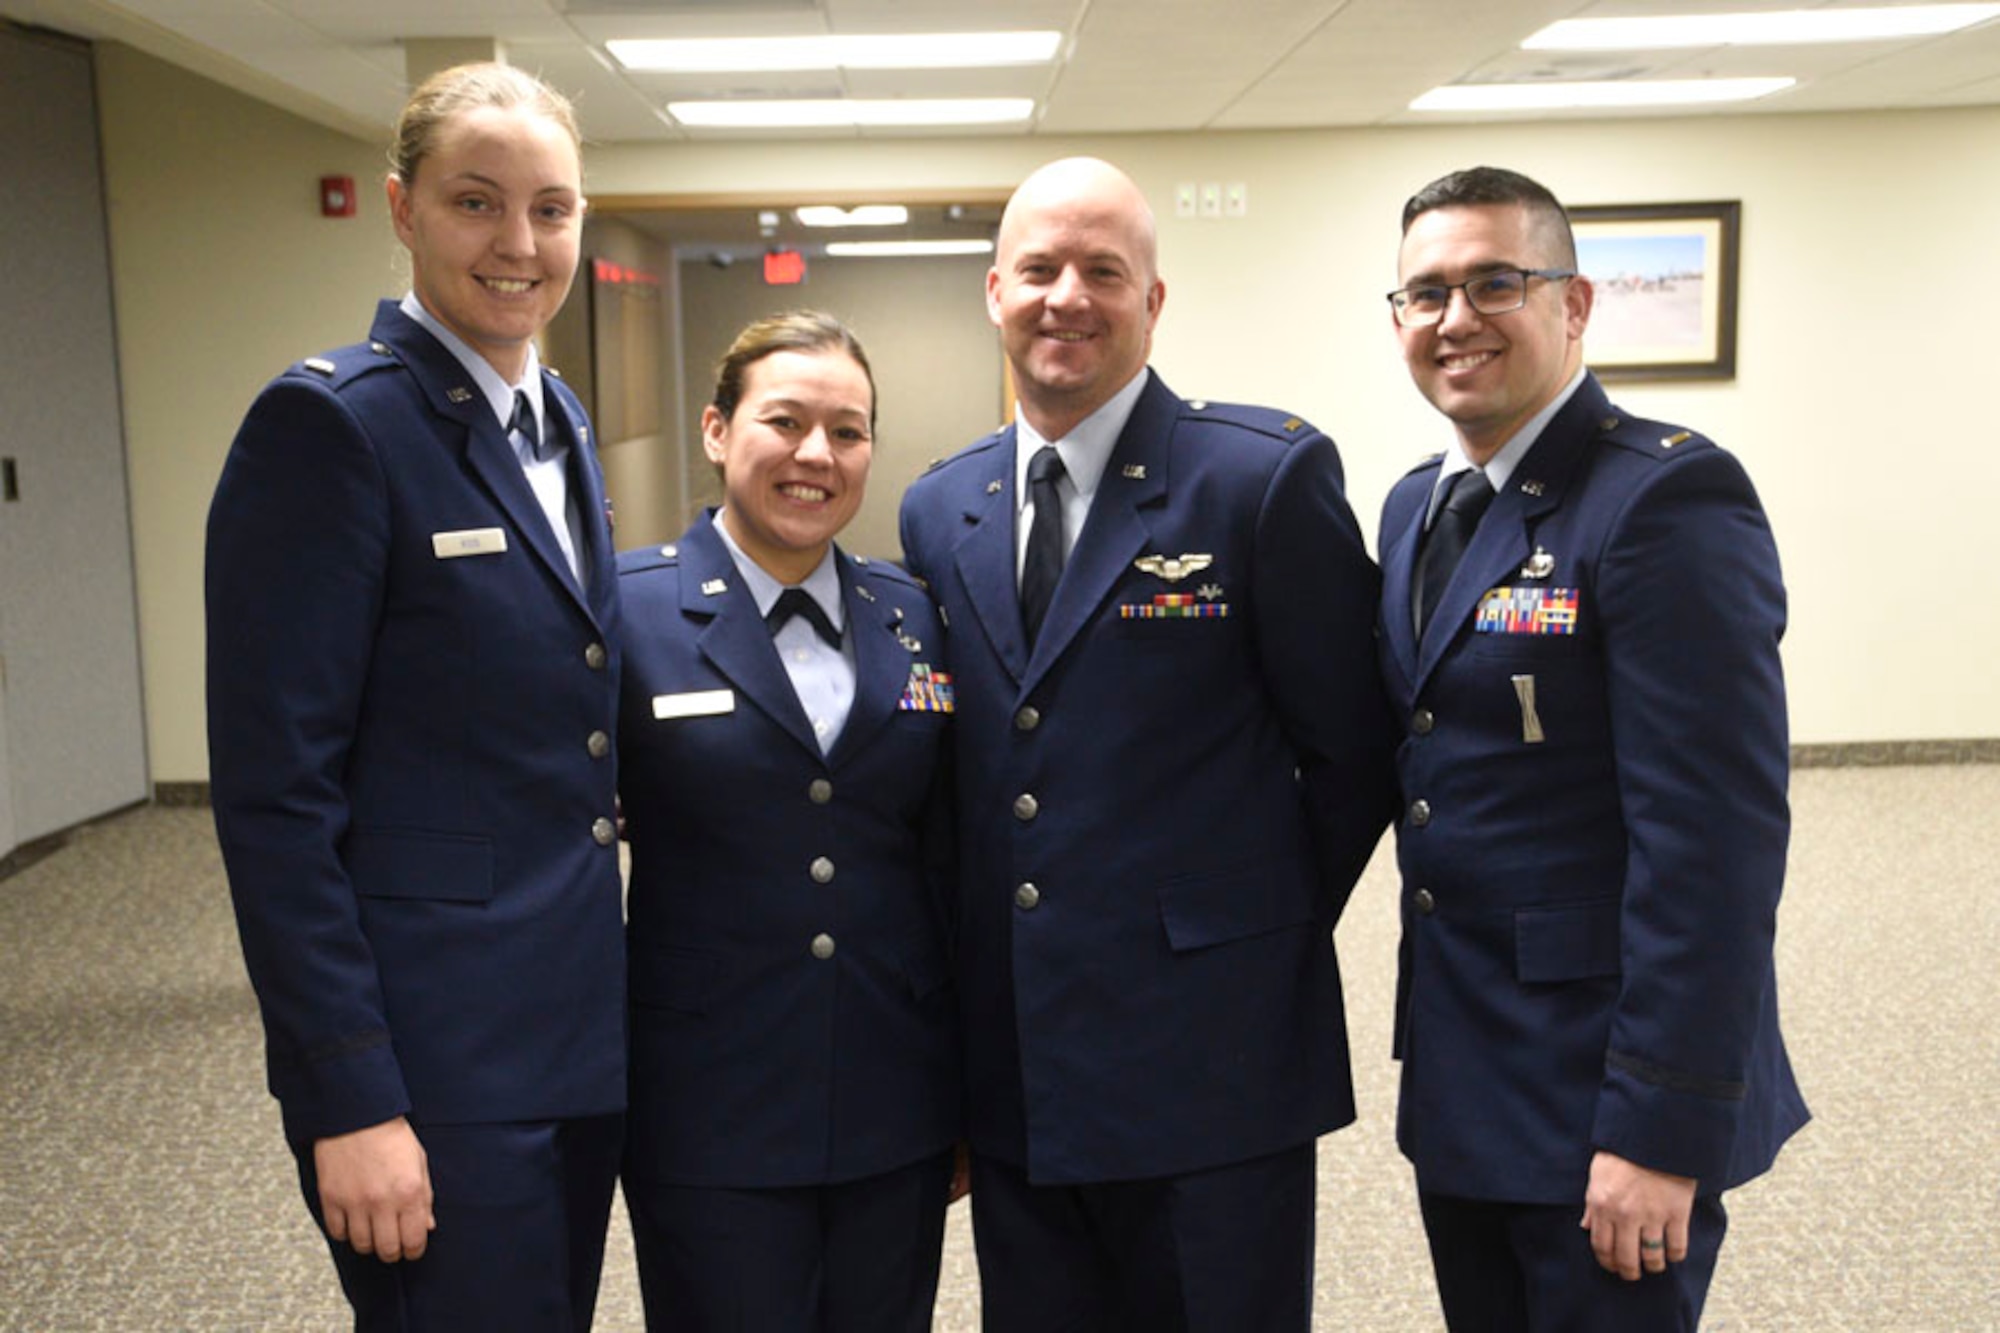 Newly promoted 120th Airlift Wing officers 1st Lts. Cassandra L. Ross, Caressa L. Hewitt, Raymond R. Orsua and Bradley J. Gauvin pose for a group photo at the 120th Airlift Wing during their promotion ceremony on base Dec. 16, 2016. (U.S. Air National Guard photo/Senior Master Sgt. Eric Peterson)